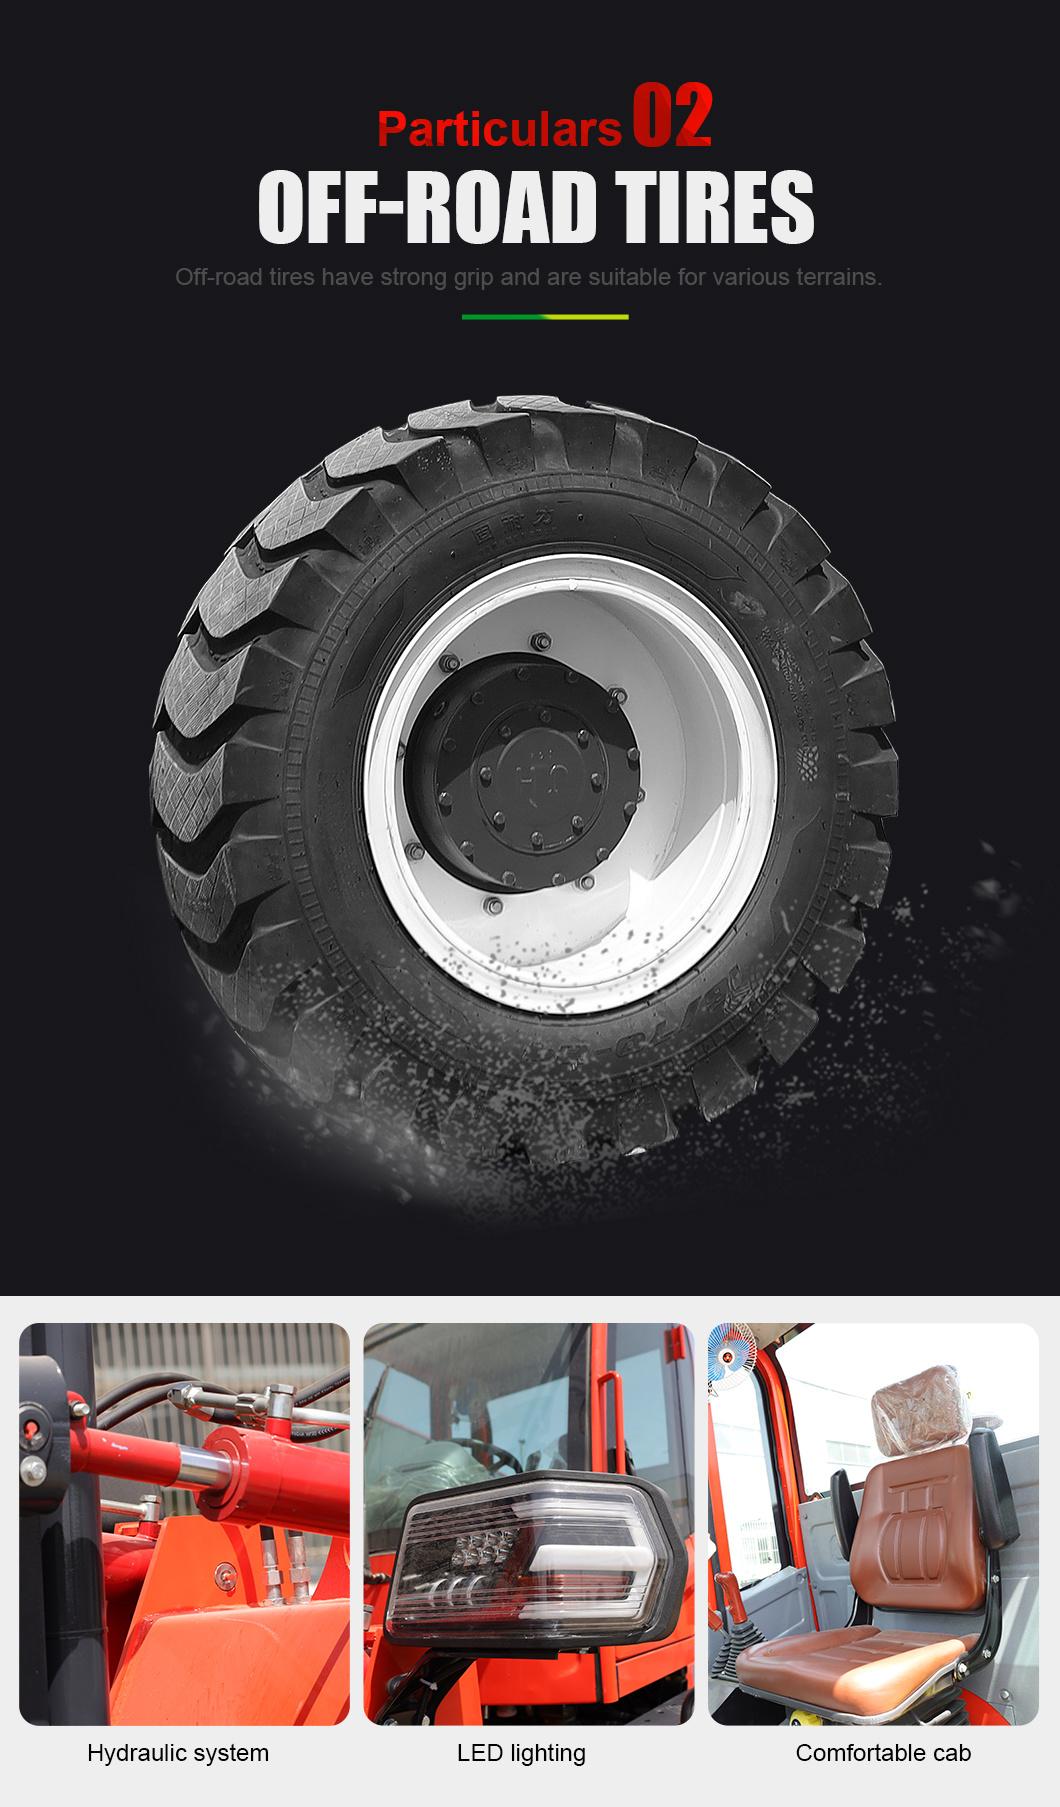 CE EPA Hot Sale 1.8t 2.5t 3ton 3.5t 5t Rough Terrain off Road Forklift Truck 4WD High Performance Optional Forklift